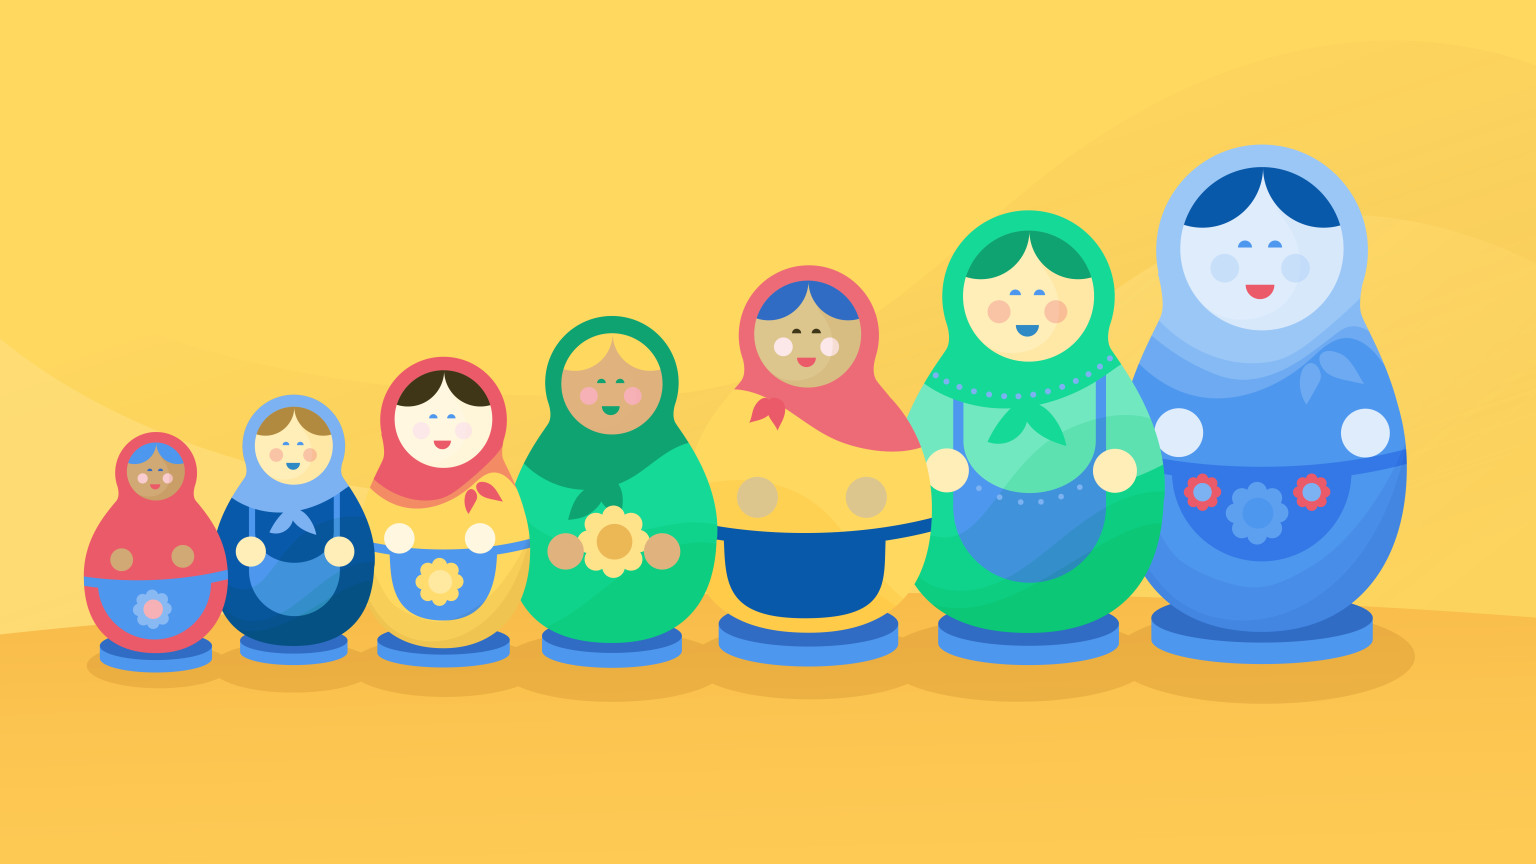 Illustrated image of seven Russian dolls standing next to each other, representing technology scalability